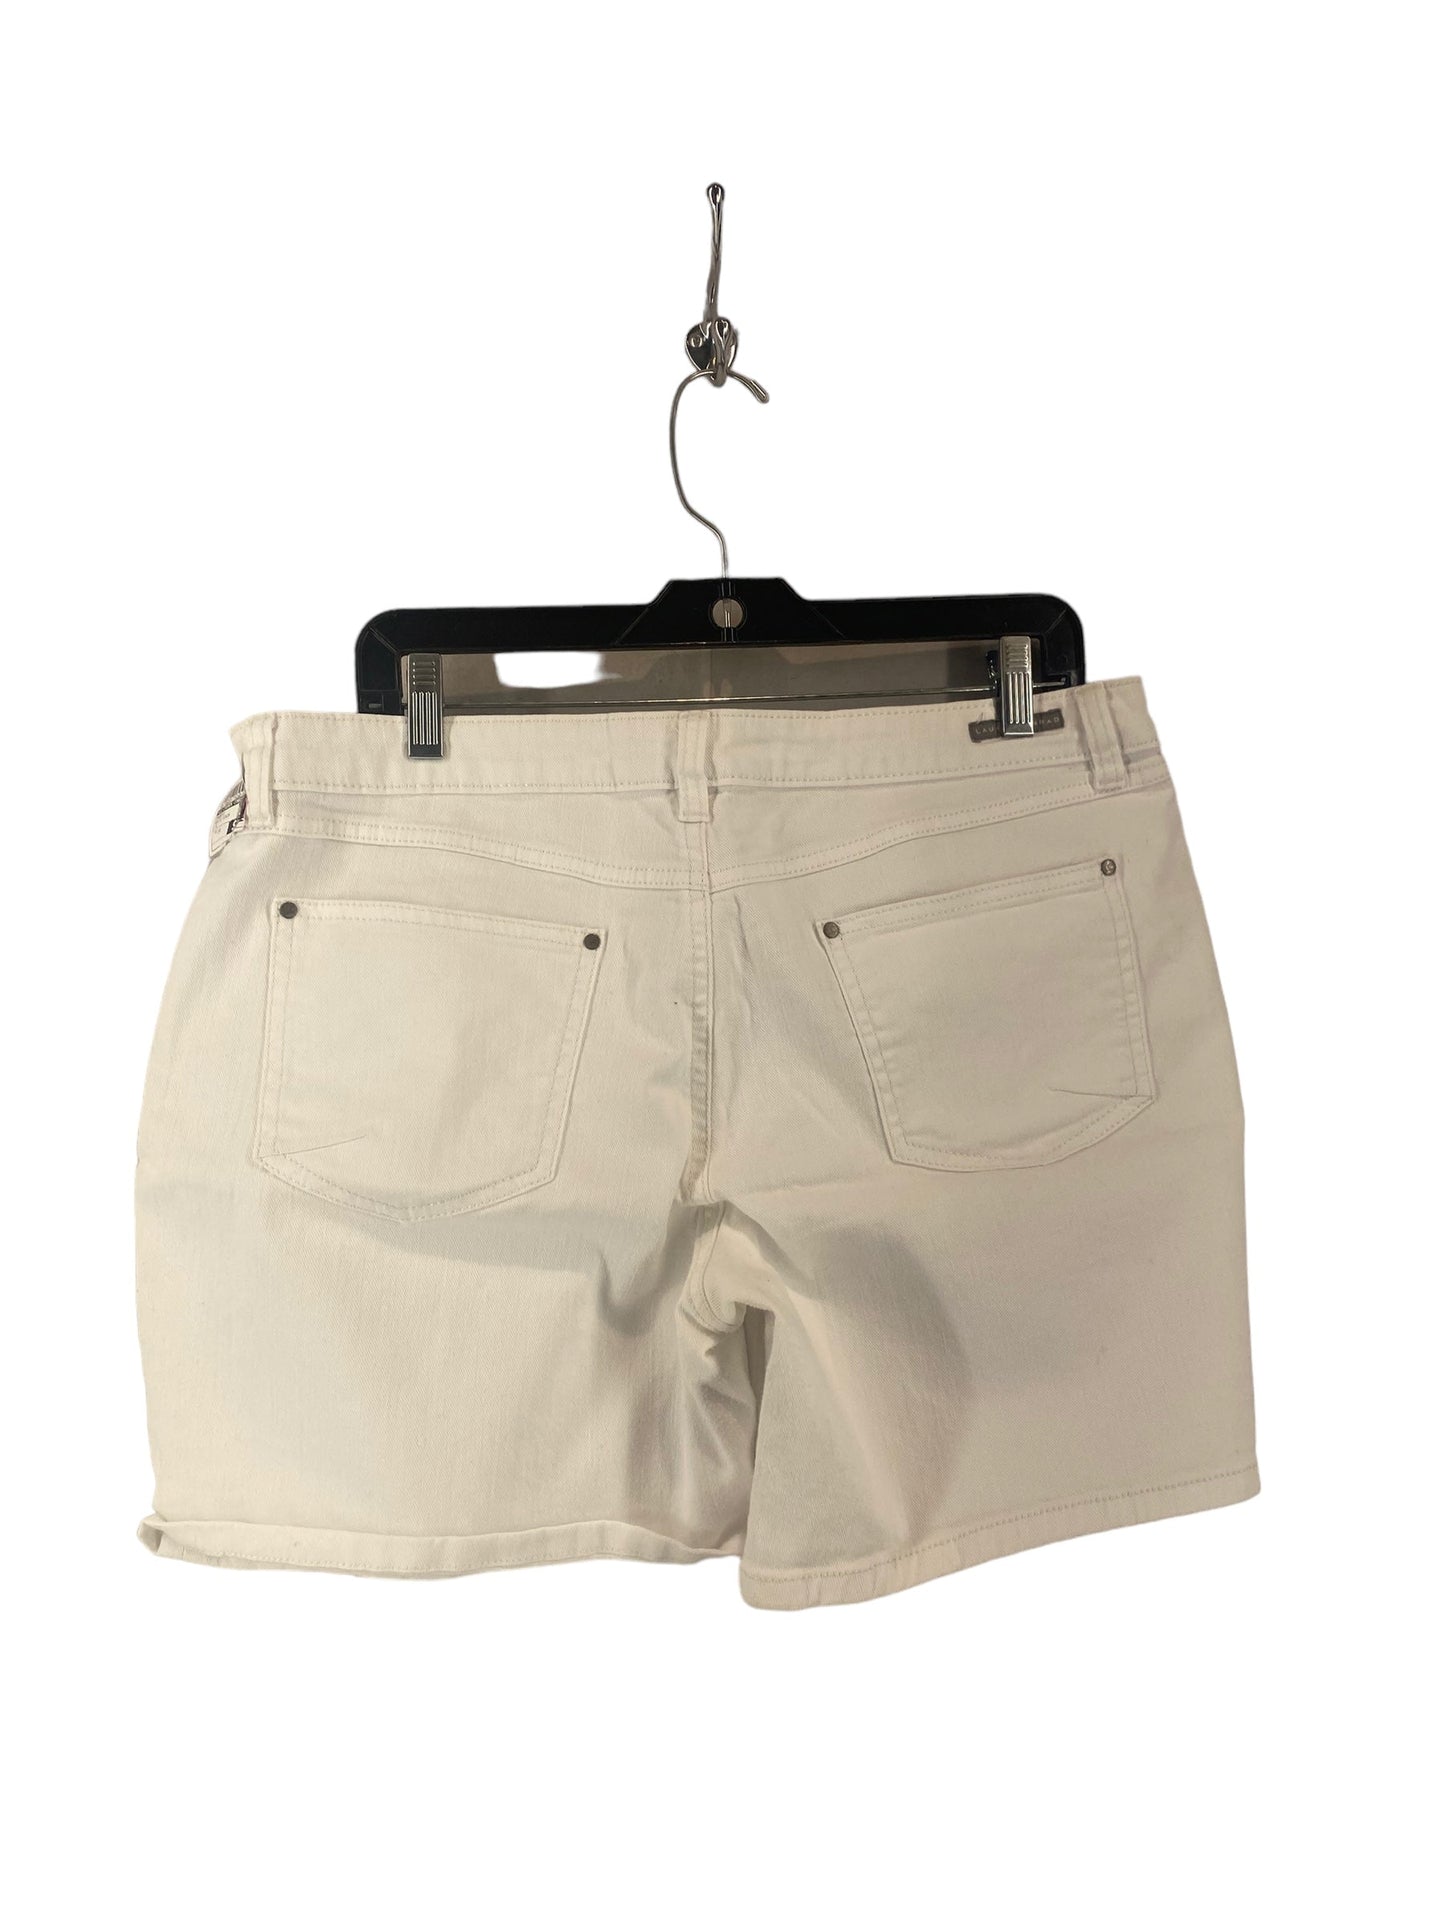 Shorts By Lc Lauren Conrad  Size: 14